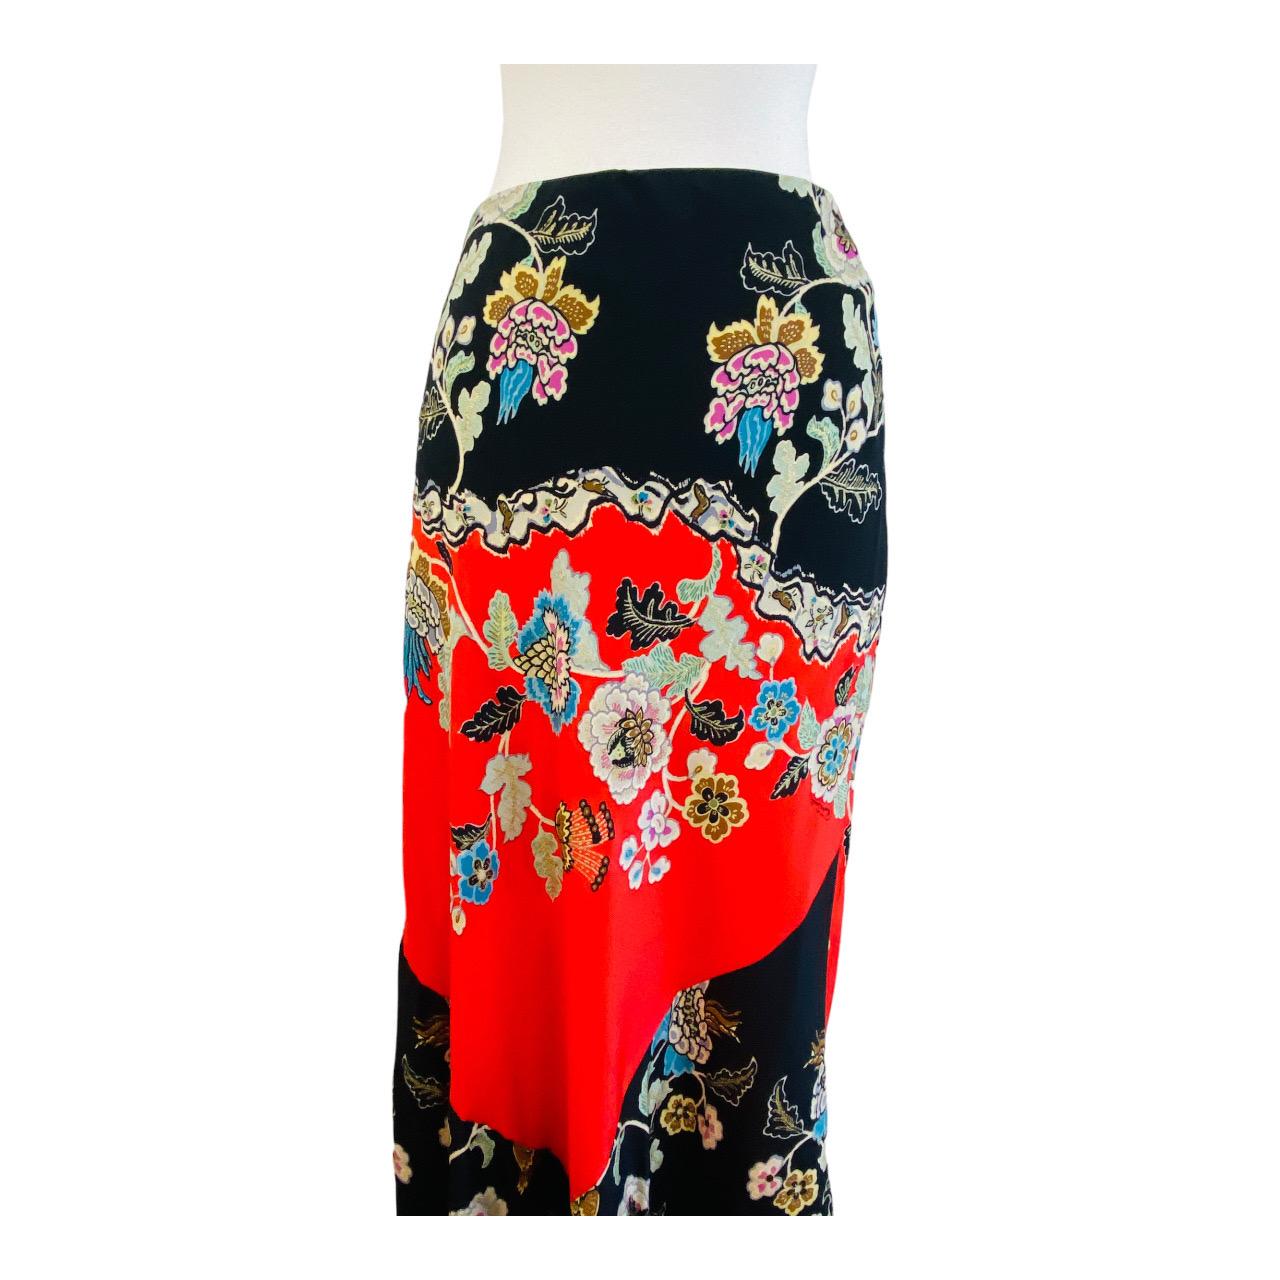 Vintage Roberto Cavalli S/S 2003 Chinoiserie Black + Red Floral Maxi Skirt For Sale 3